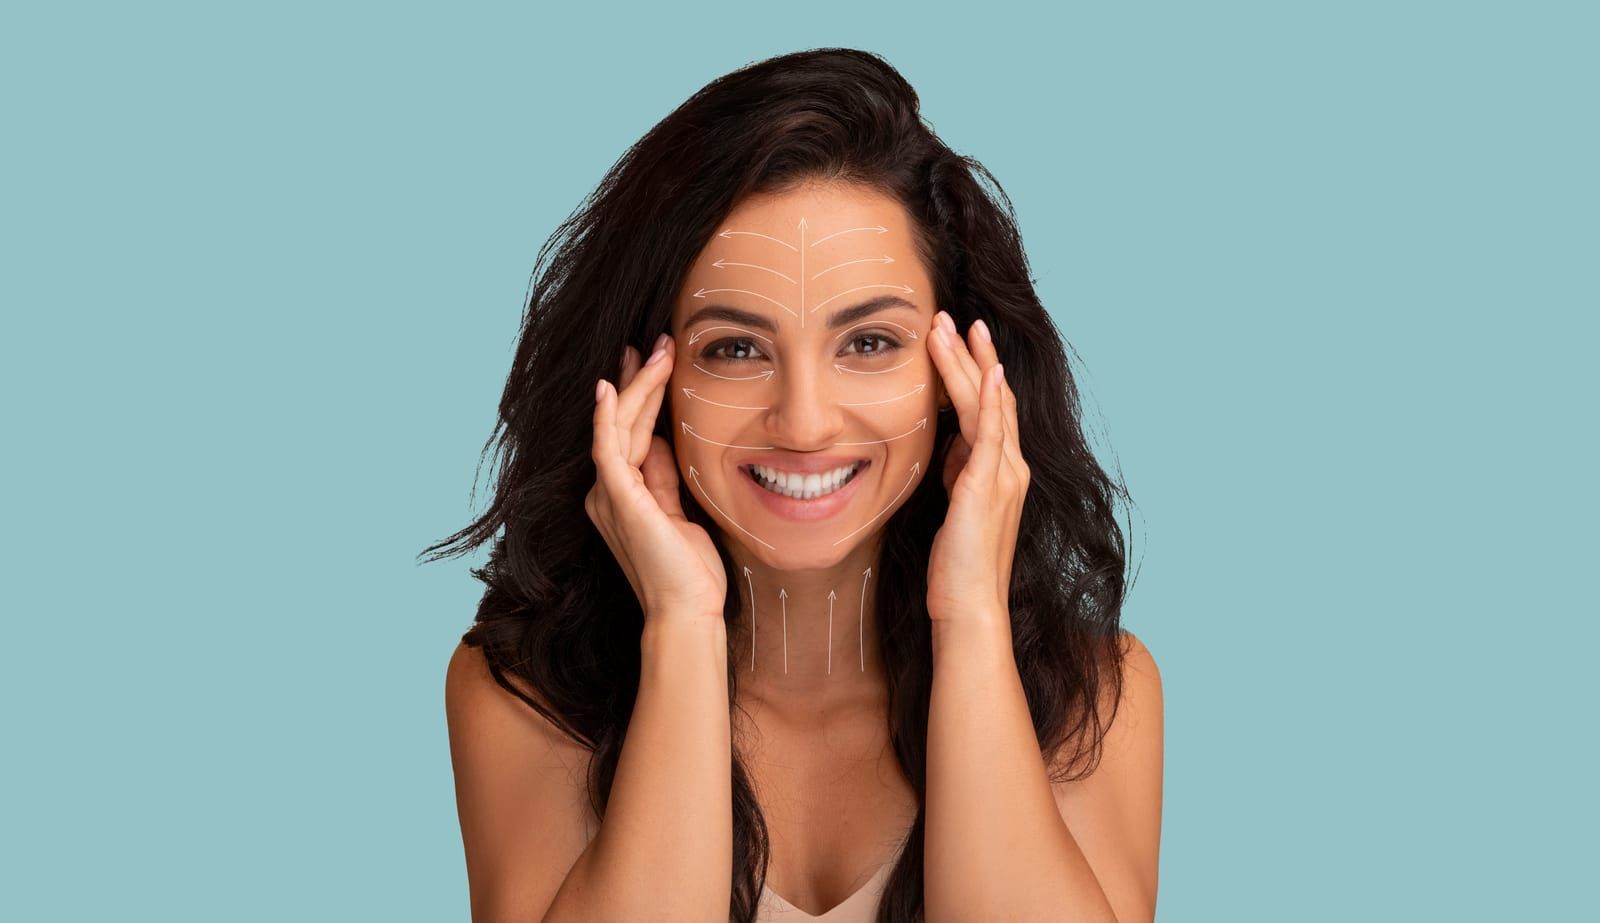 A woman is smiling and touching her face with her hands.